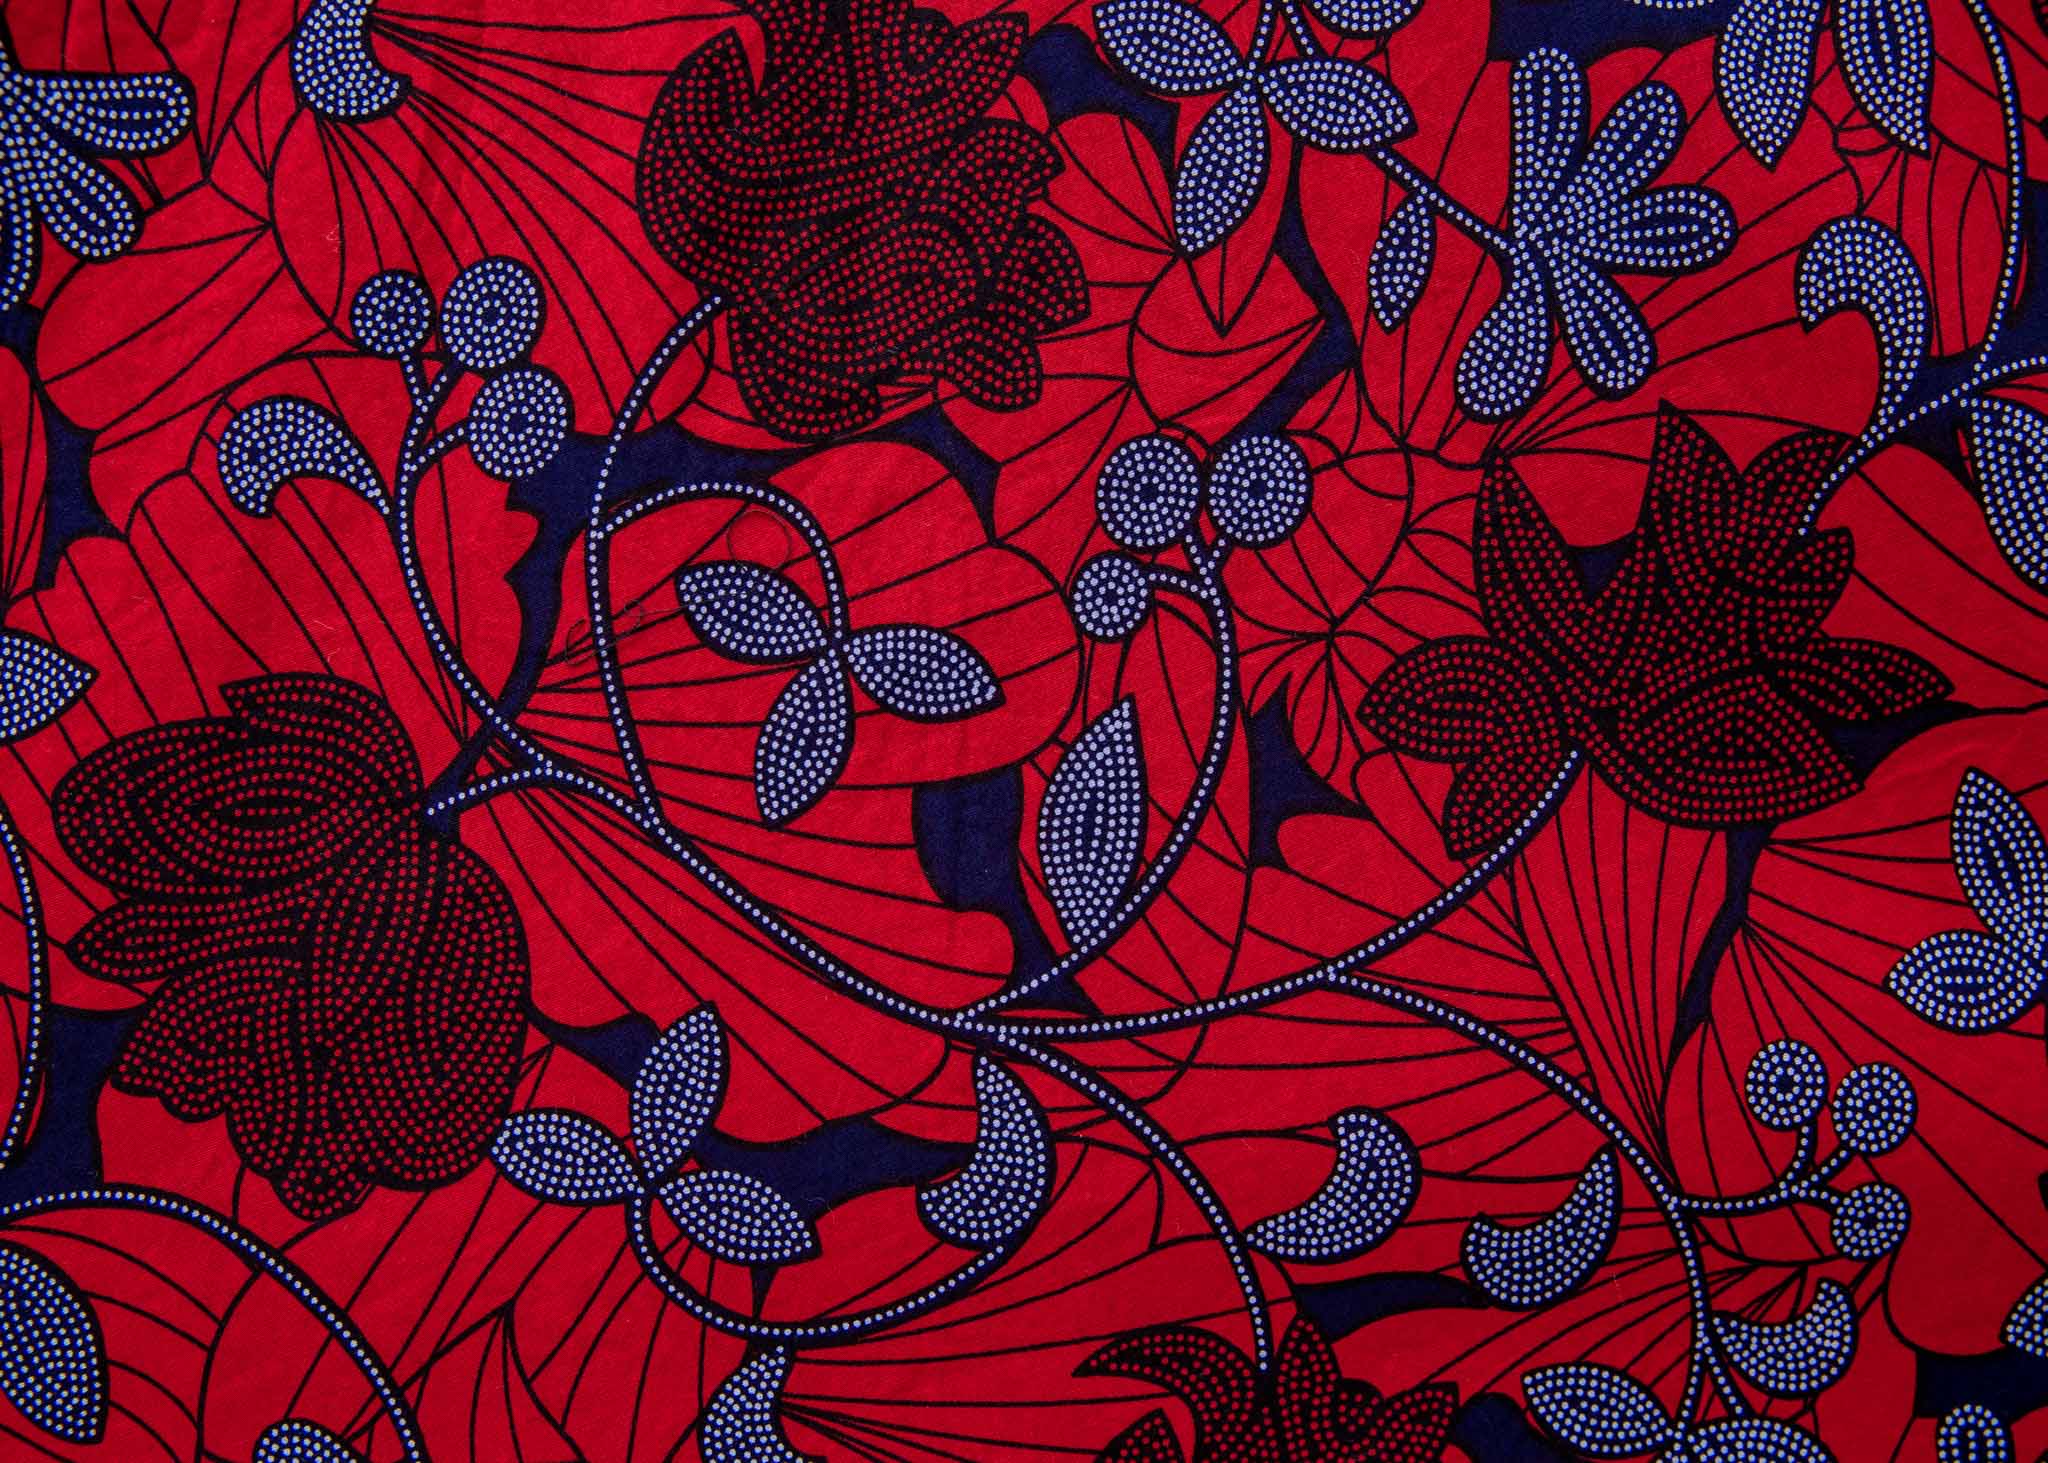 Close up display of red dress with floral vine print, fabric.